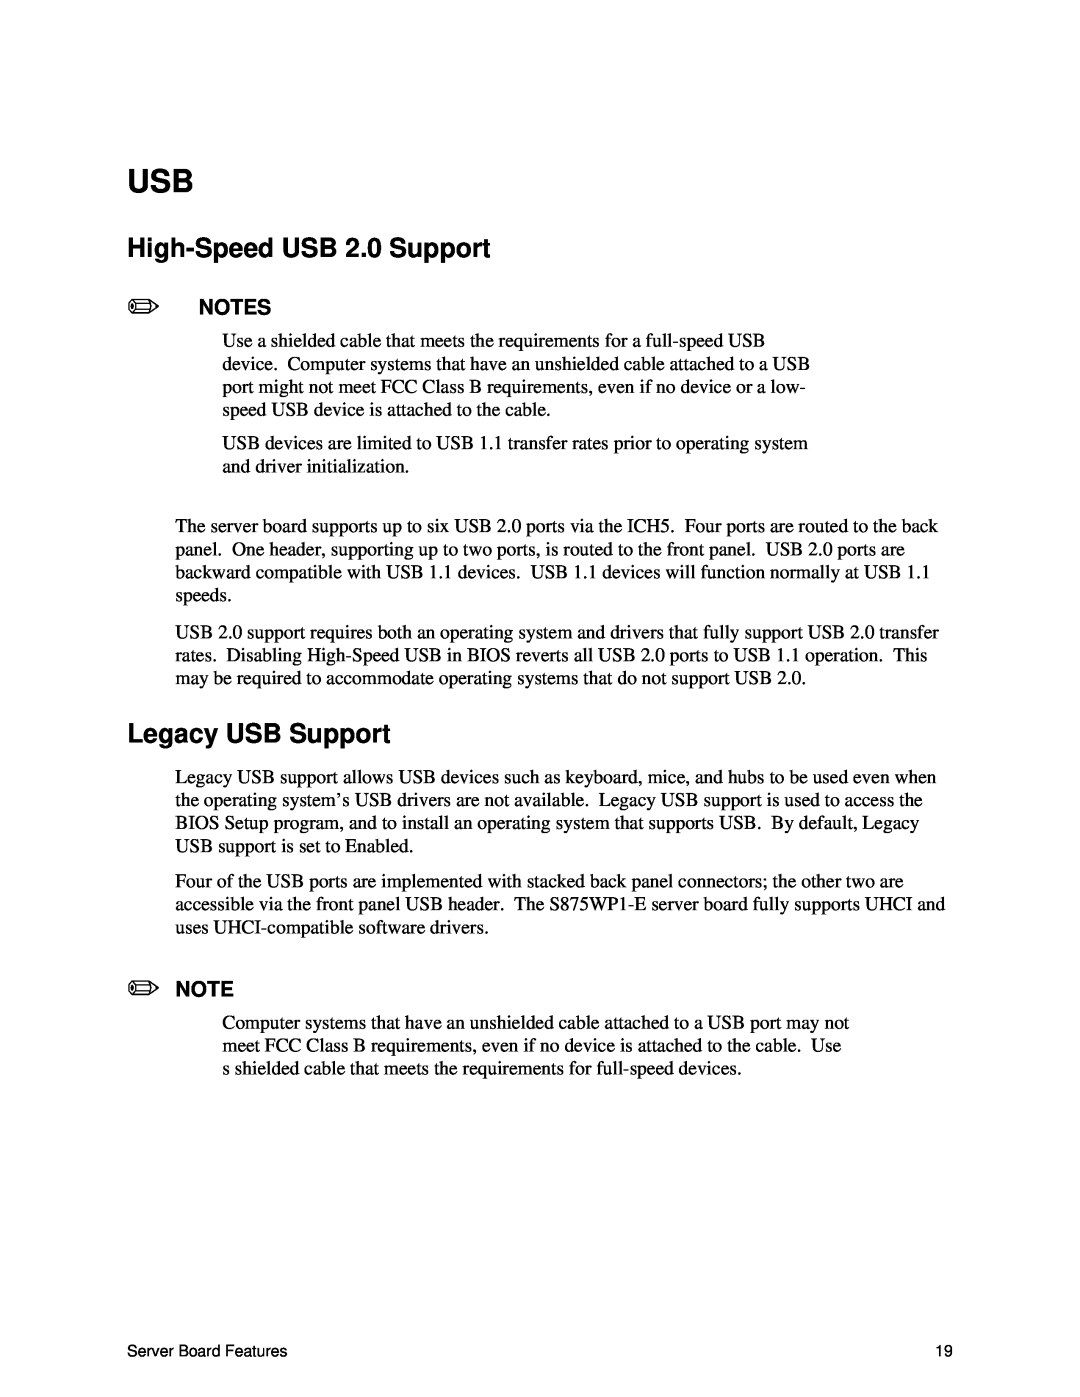 Intel S875WP1-E manual High-Speed USB 2.0 Support, Legacy USB Support 